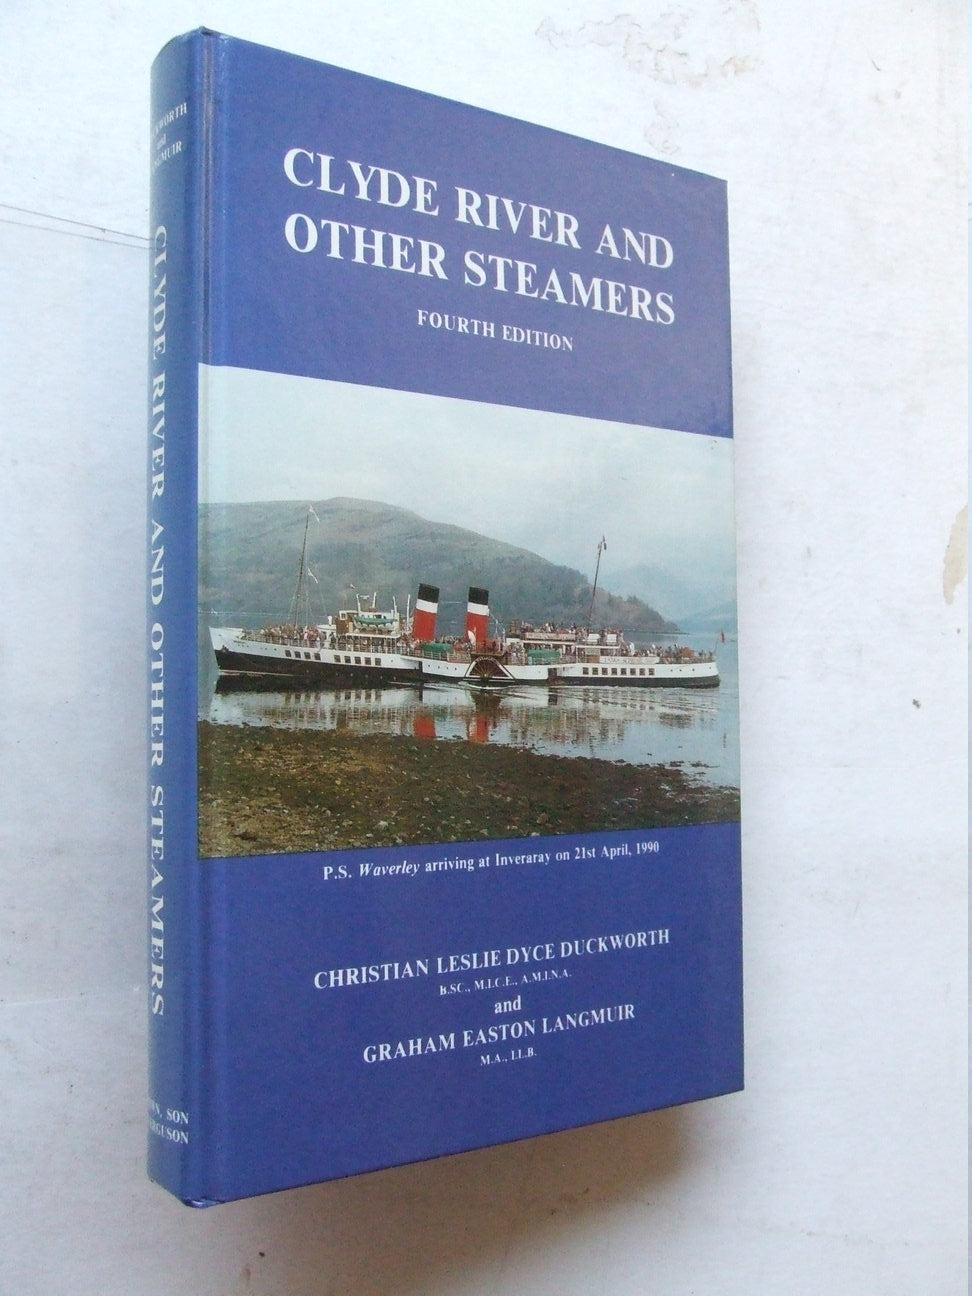 Clyde River and Other Steamers  -  4th edition